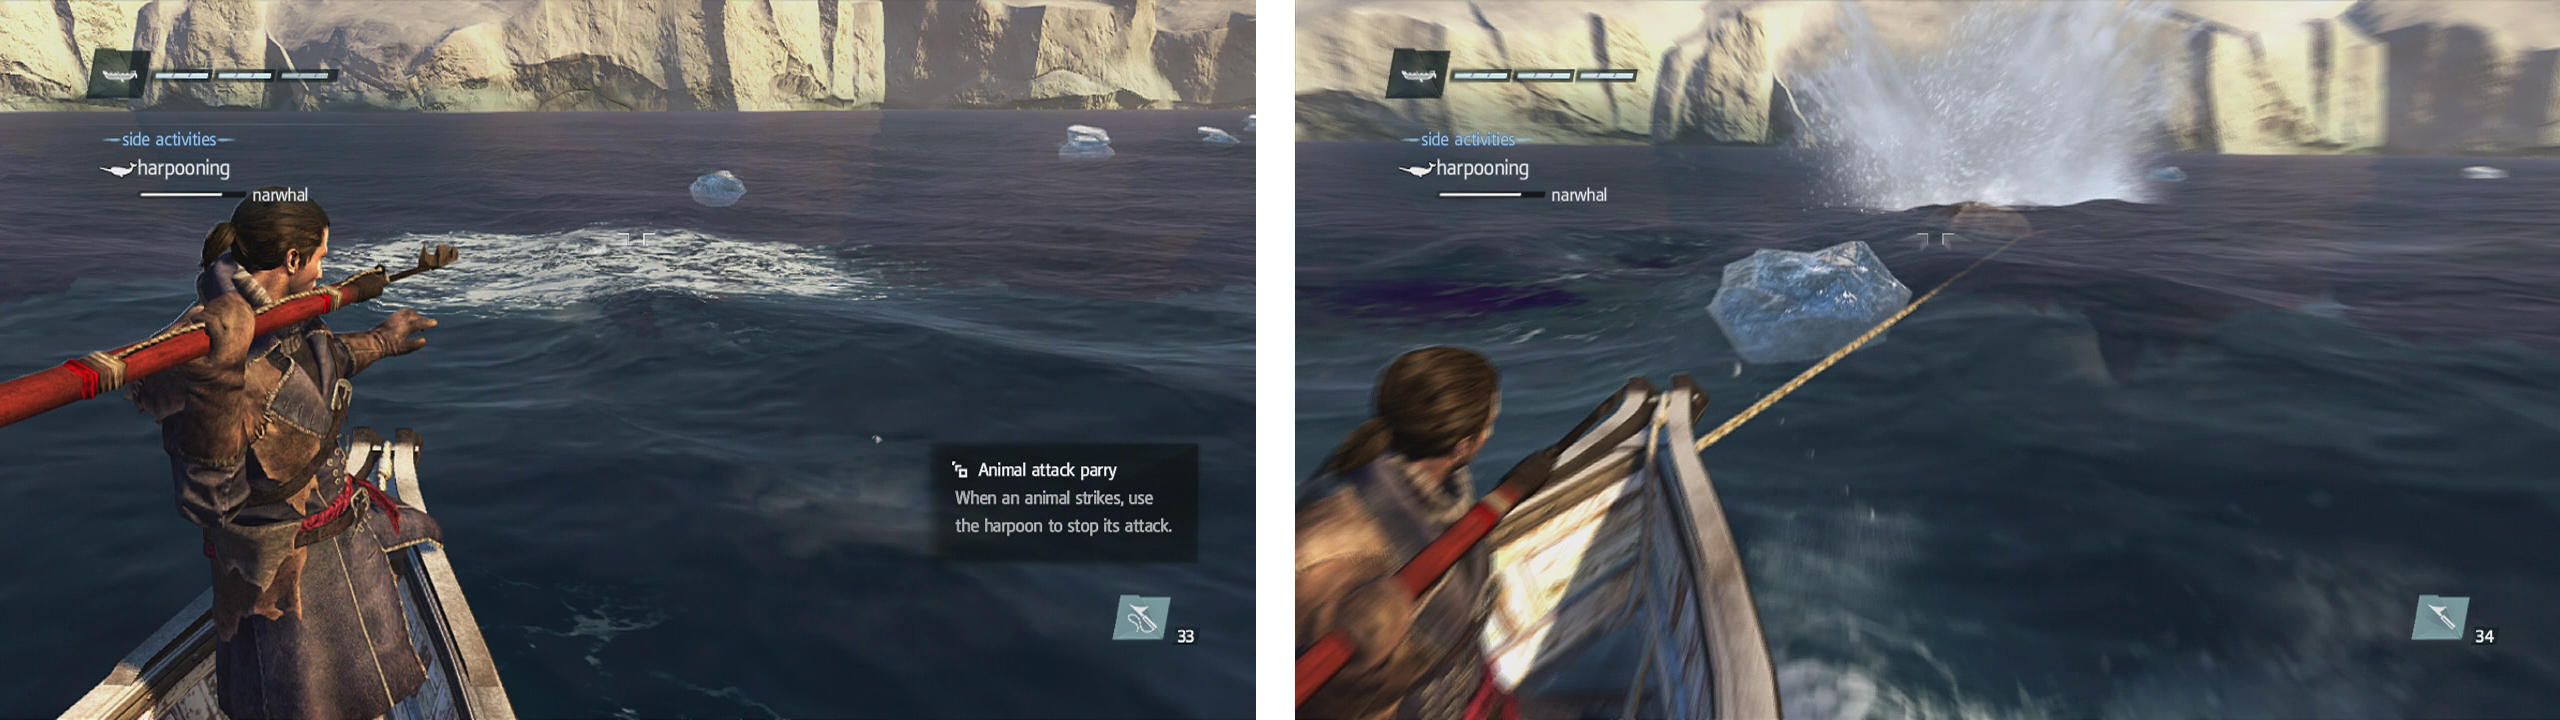 Bubles in the water (left) usually indicate the animal's location. Once you hit it wit a harpoon, continue to do so as it drags you along (right).